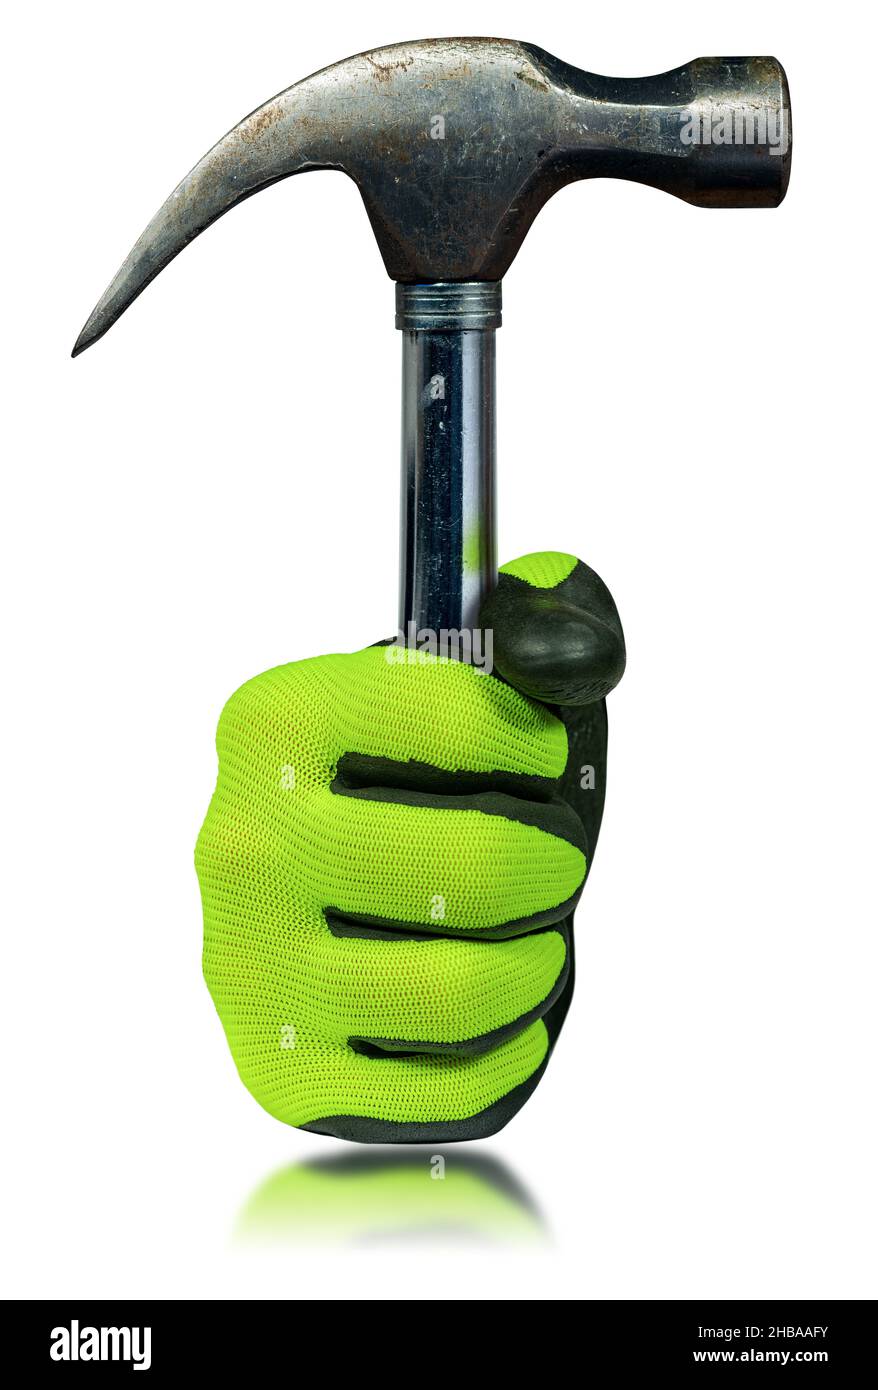 Hand with green and black protective work glove holding an old steel claw hammer. Isolated on white background with reflections. Stock Photo